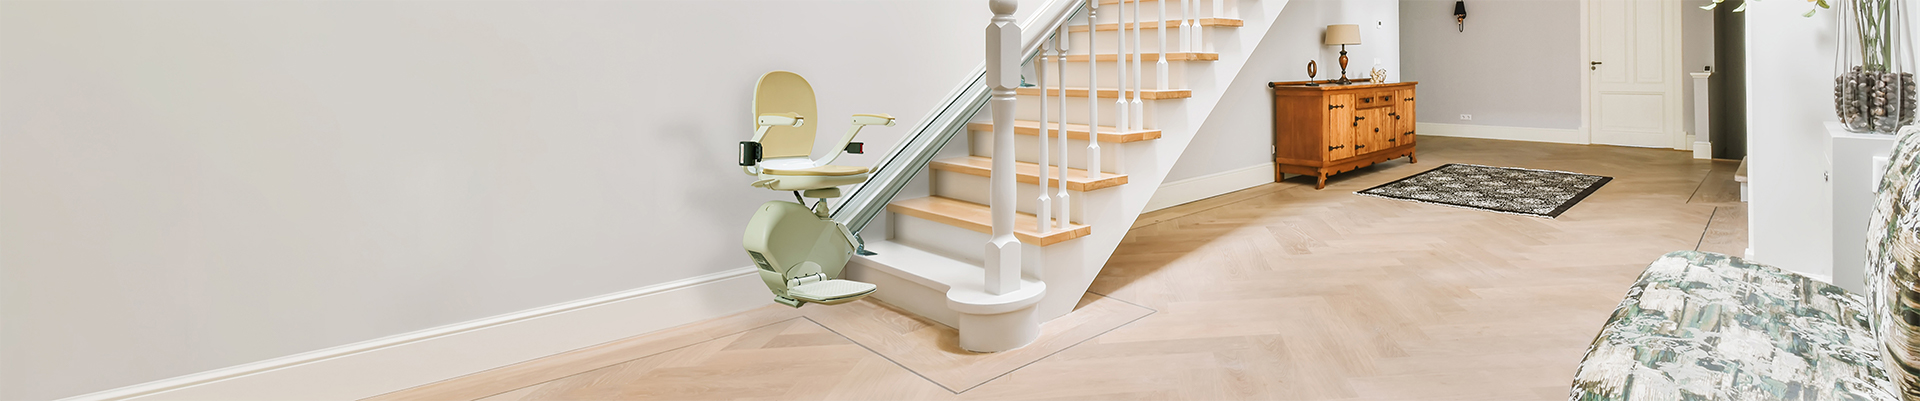 Stairlifts in a Birmingham home